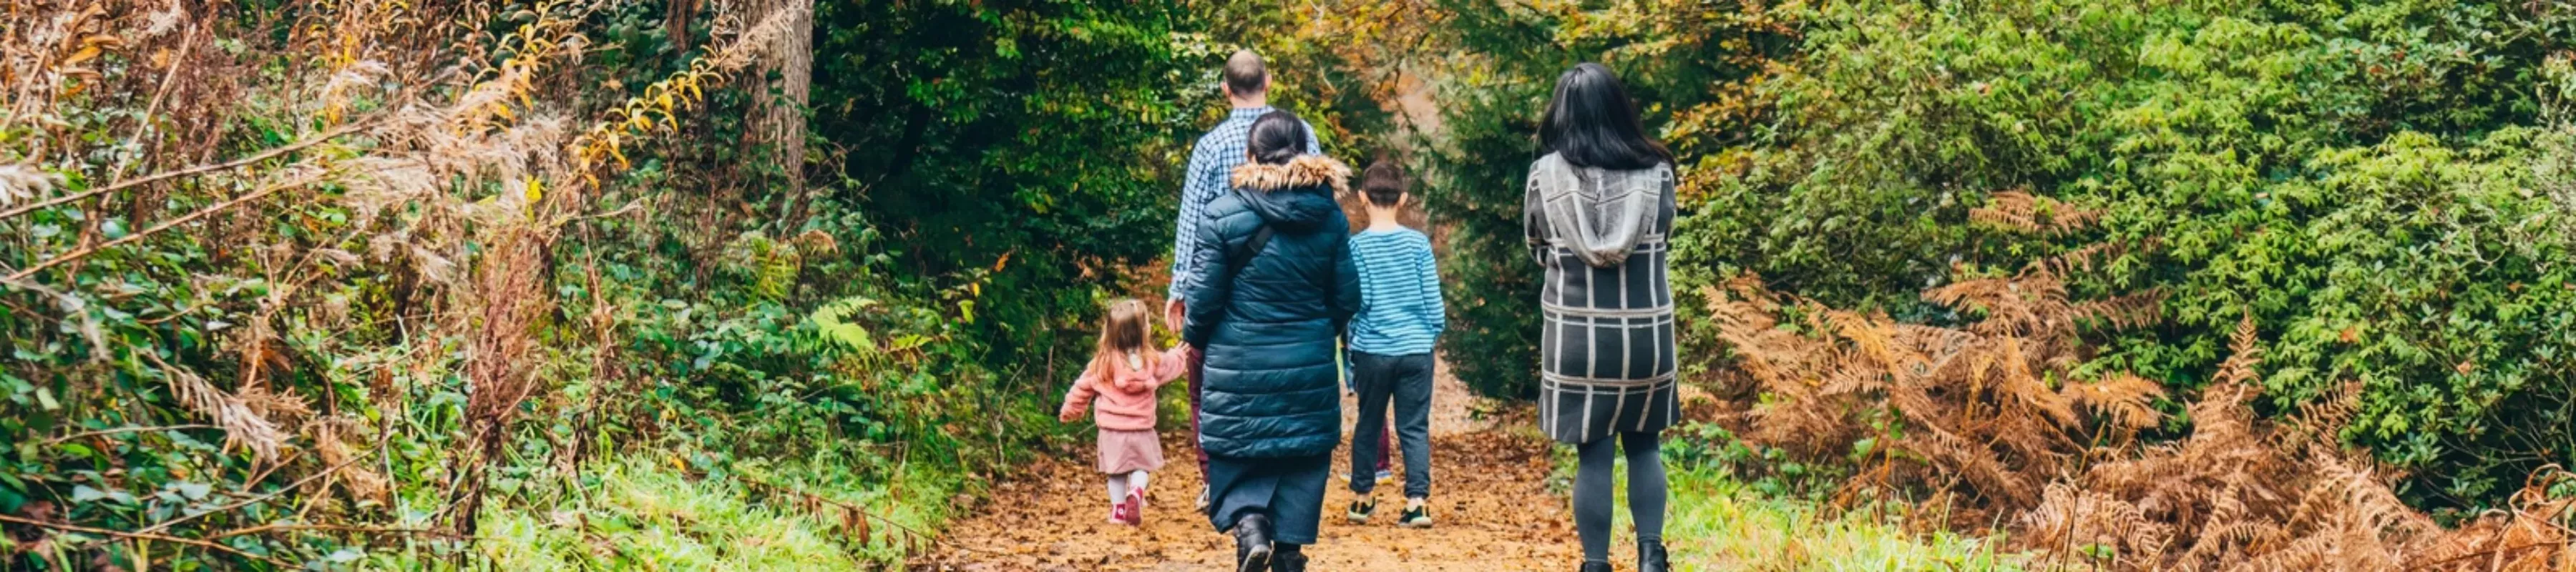 A family walking in a forest environment